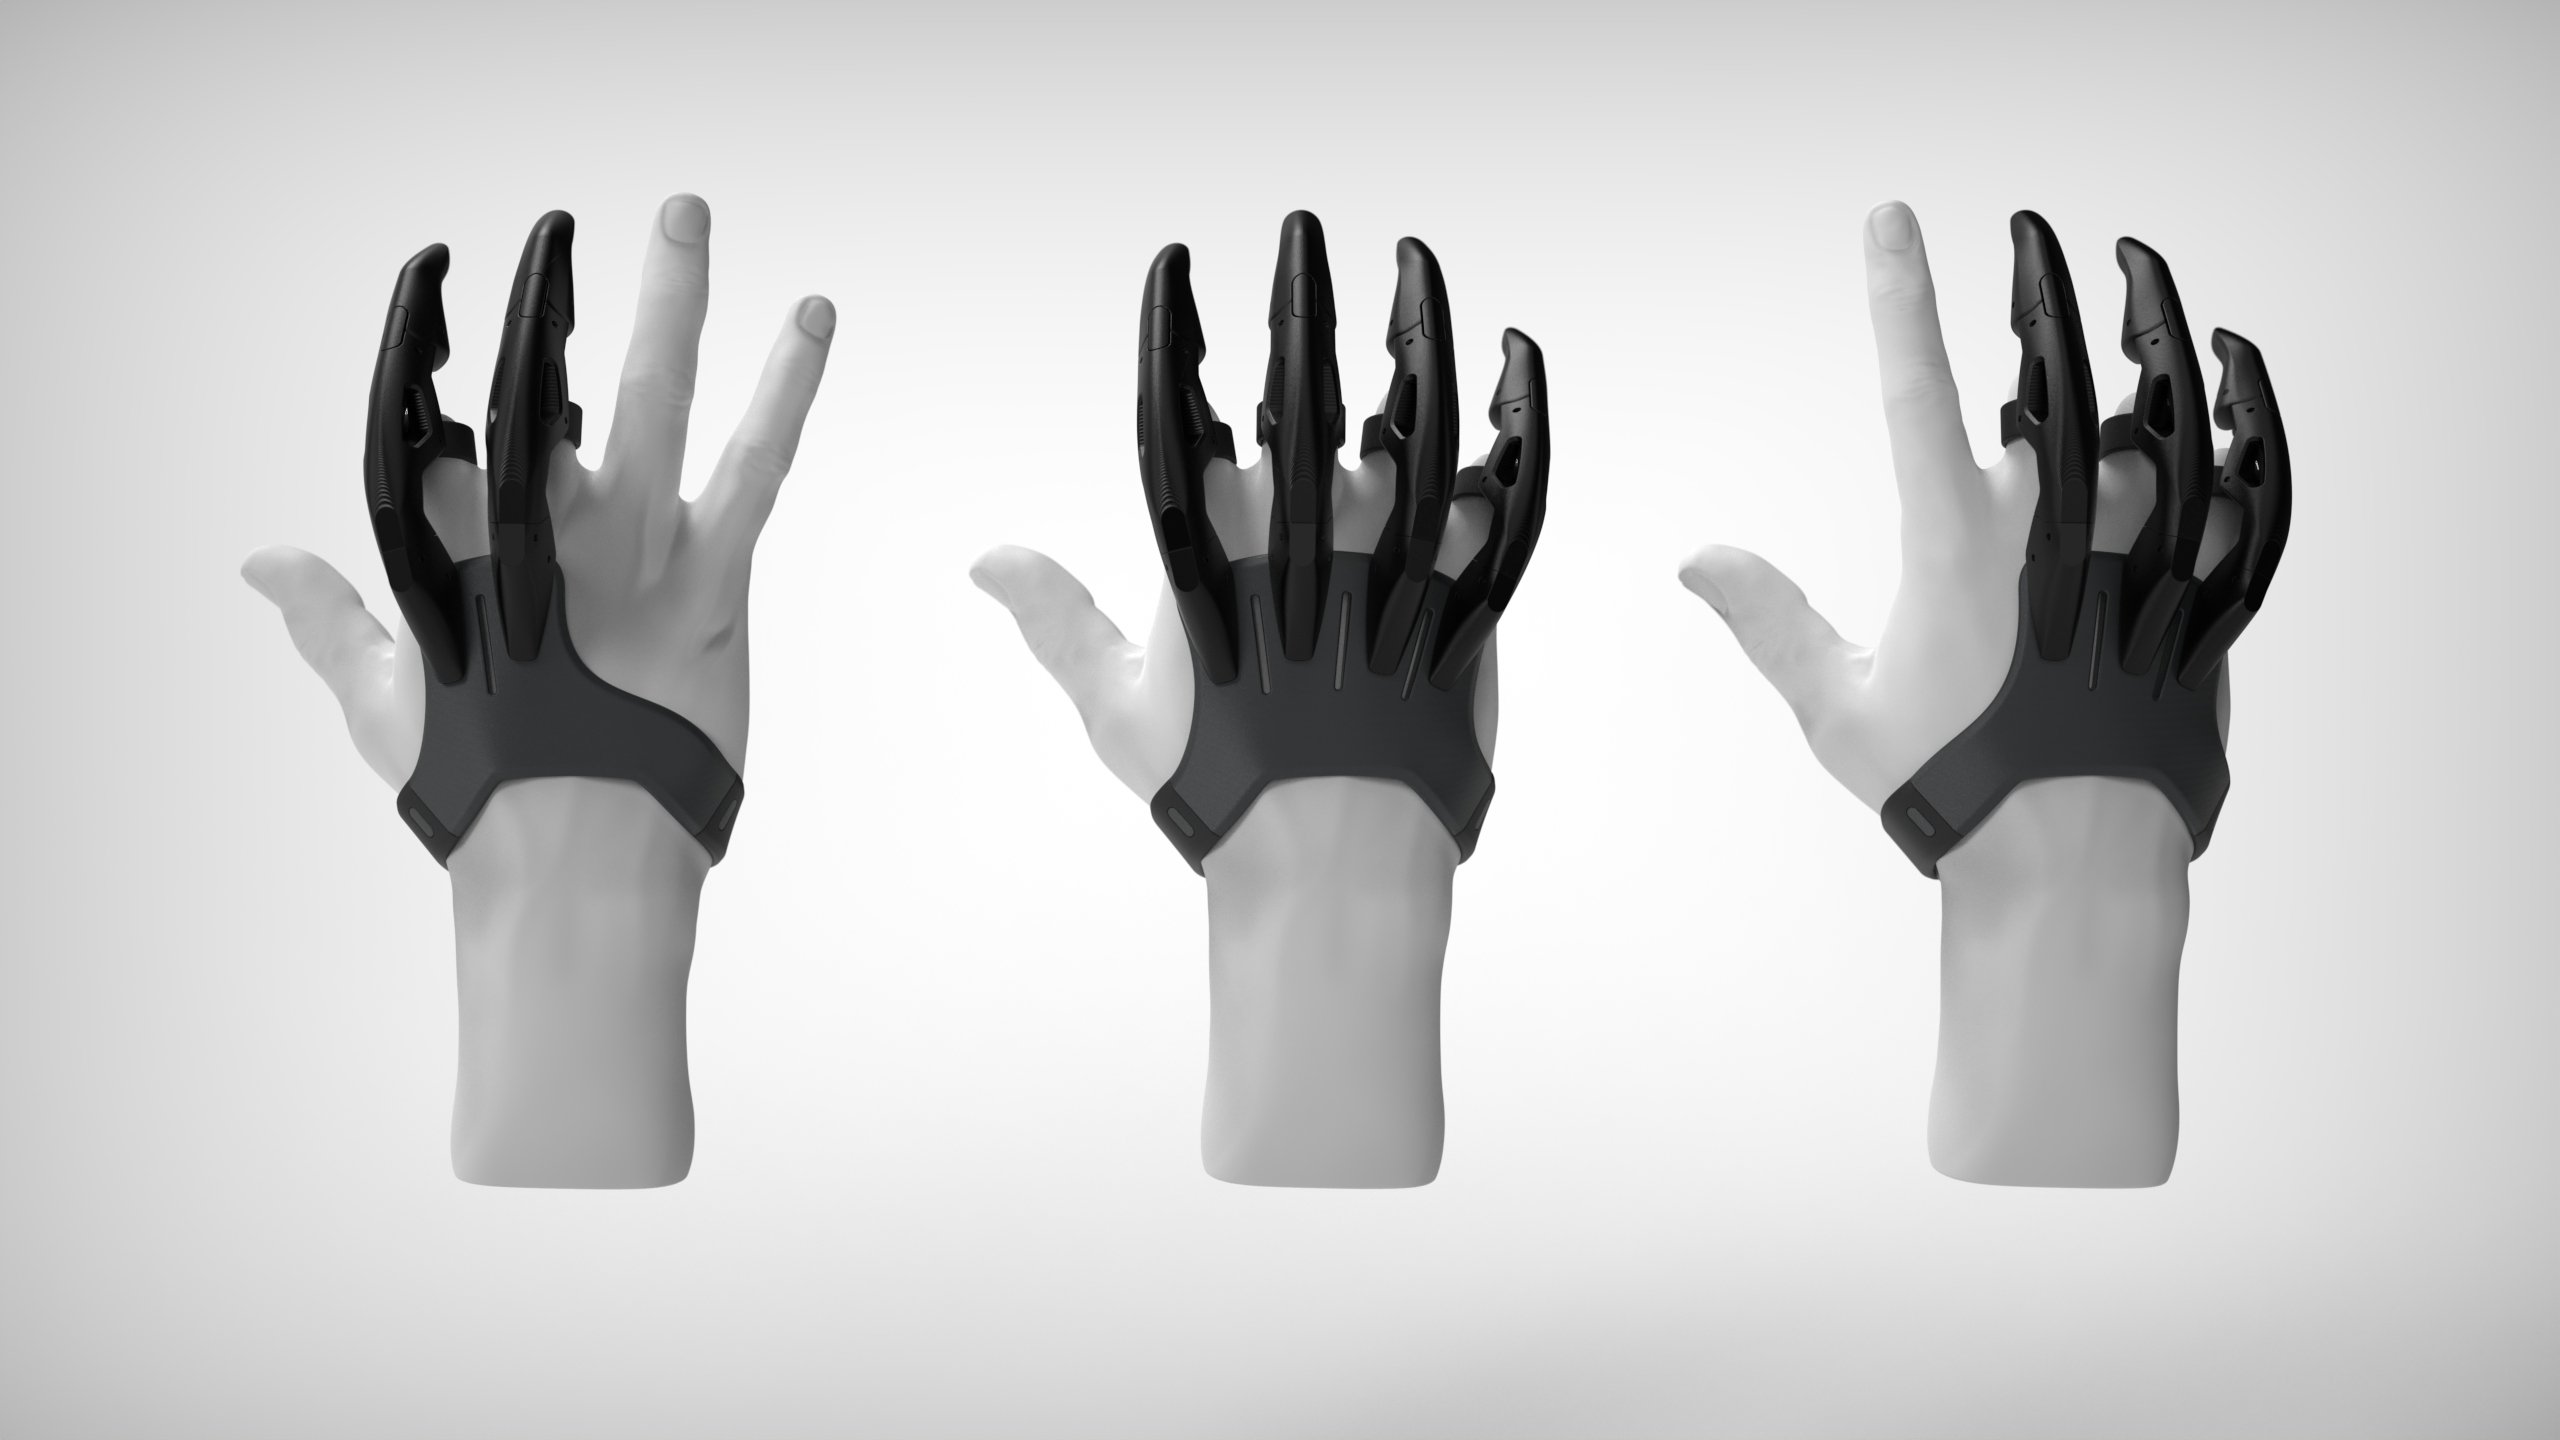 Finger Prosthesis Wins Design Award, Offered as Open-Source - The